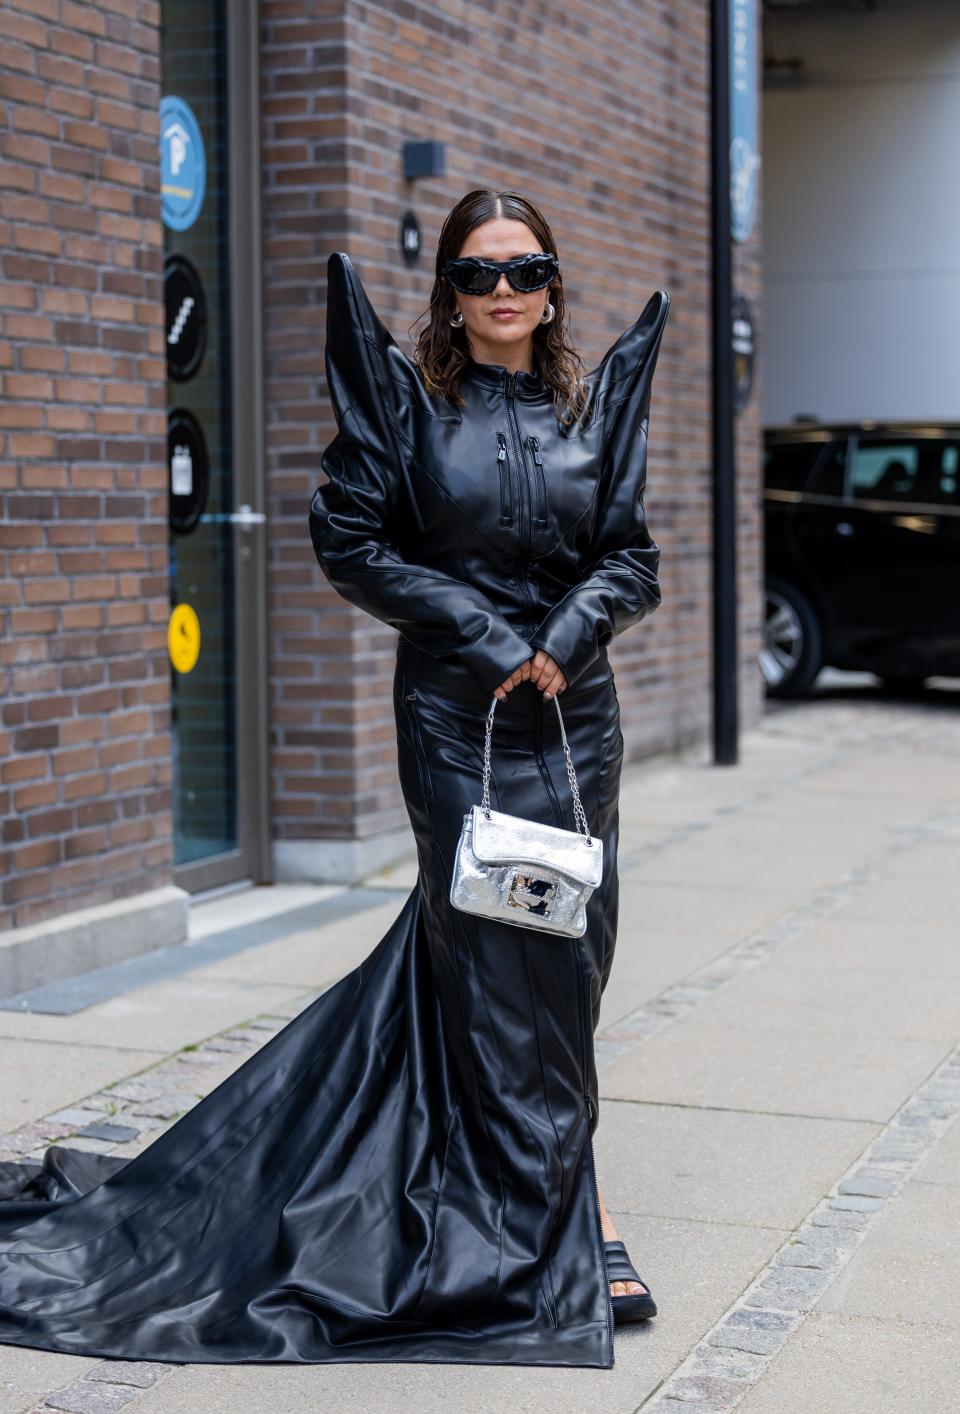 Amelia Stanescu in a maxi black leather dress with statement shoulder details